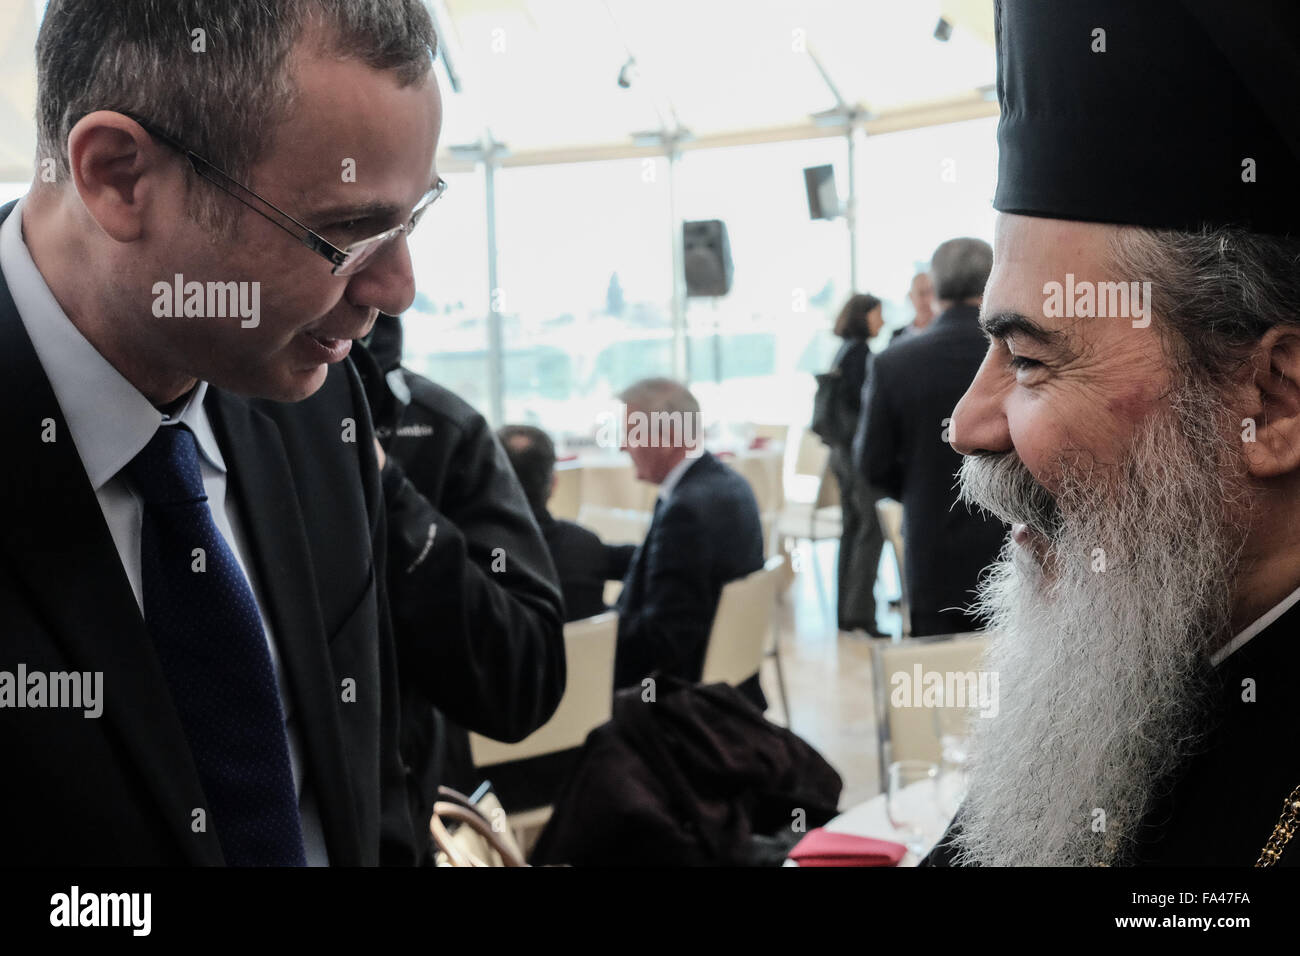 Jerusalem, Israel. 21st December, 2015. Israeli Minister of Tourism, YARIV LEVIN (L), welcomes Greek Orthodox Patriarch Of Jerusalem, THEOPHILOS III (R), at the Blaustein Hall in the Shimshon Center. Minister Levin hosted a pre-Christmas reception for leaders of the Christian communities and churches in Israel at the Shimshon Center, Beit Shmuel, in Jerusalem. Credit:  Nir Alon/Alamy Live News Stock Photo